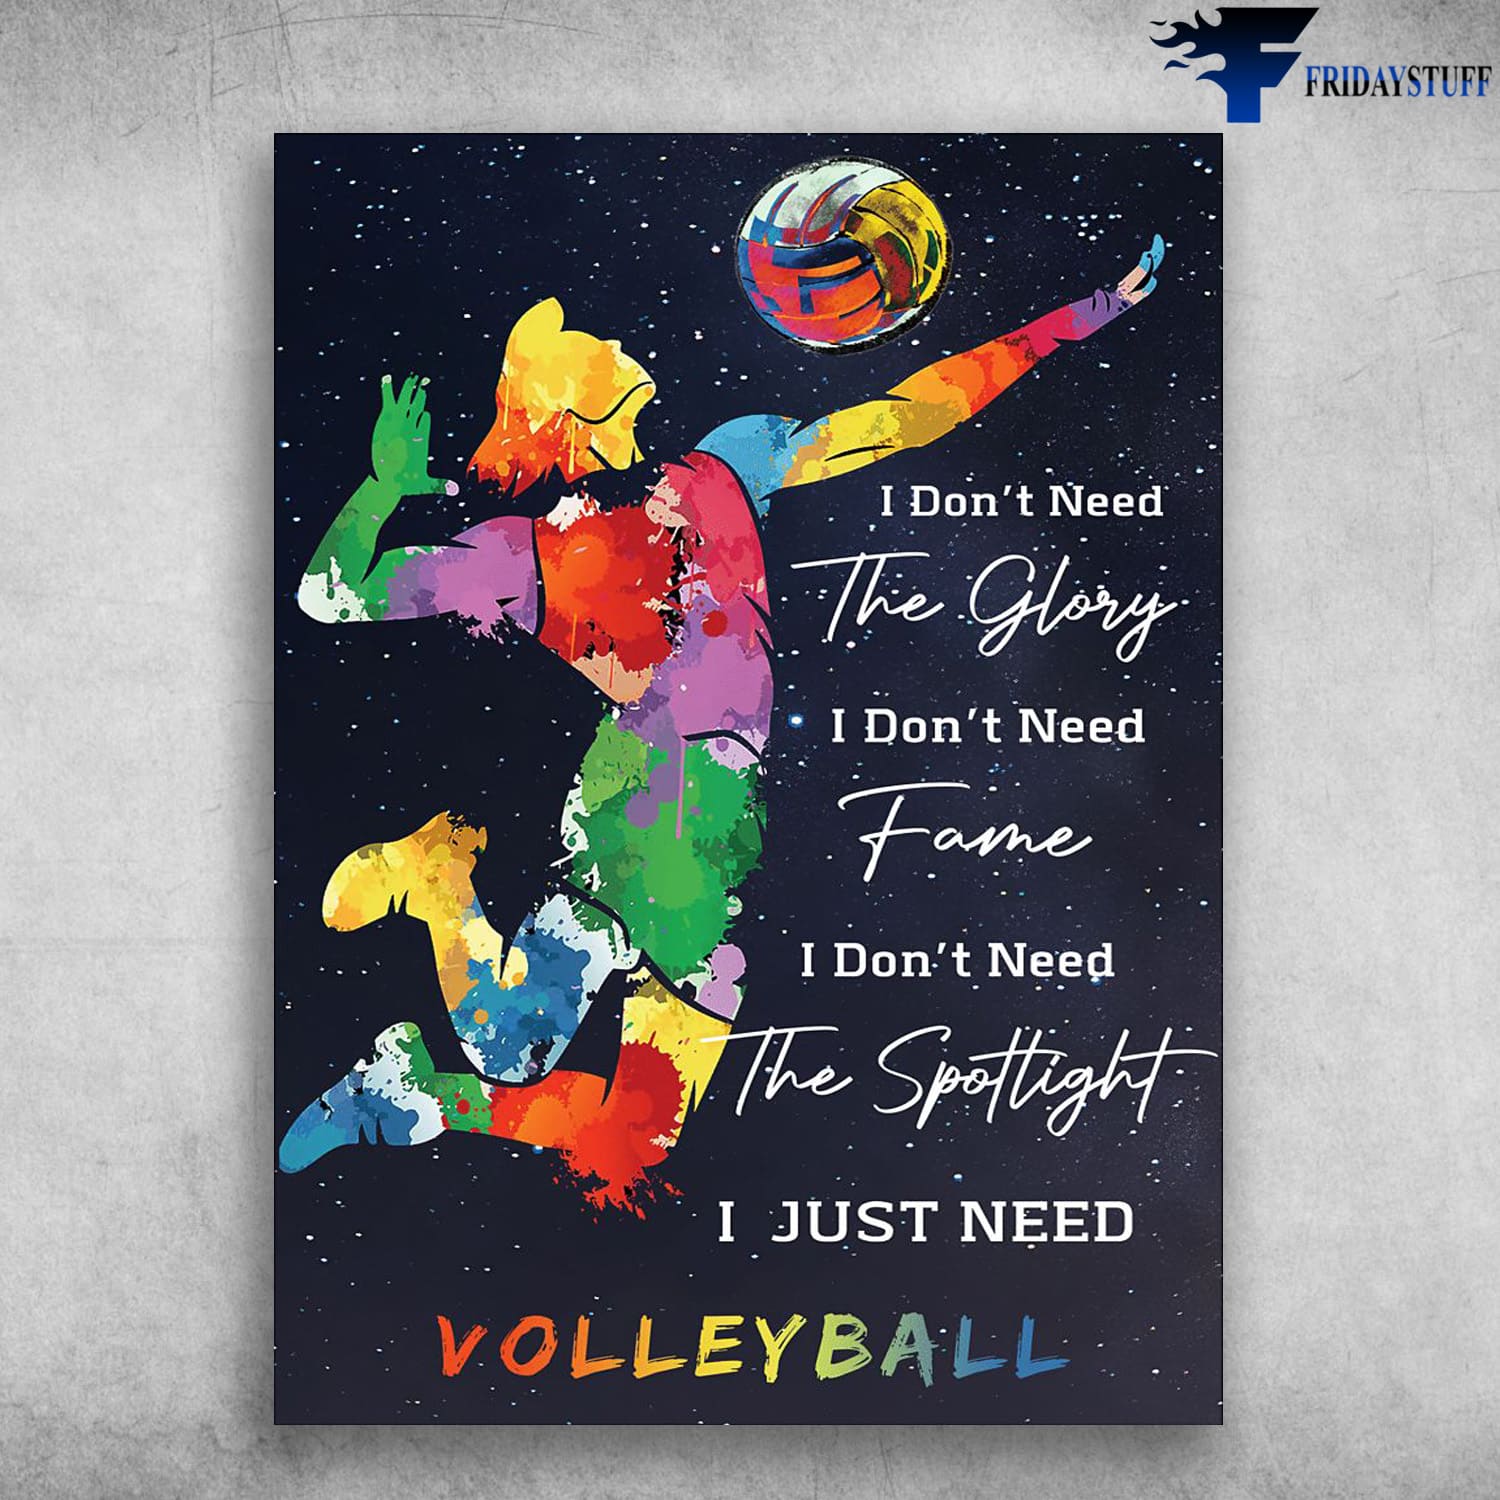 Volleyball Player, Volleyball Lover, I Don't Need The Glory, I Don't Need Fame, I Don't Need The Spotlight, I Just Need Volleyball